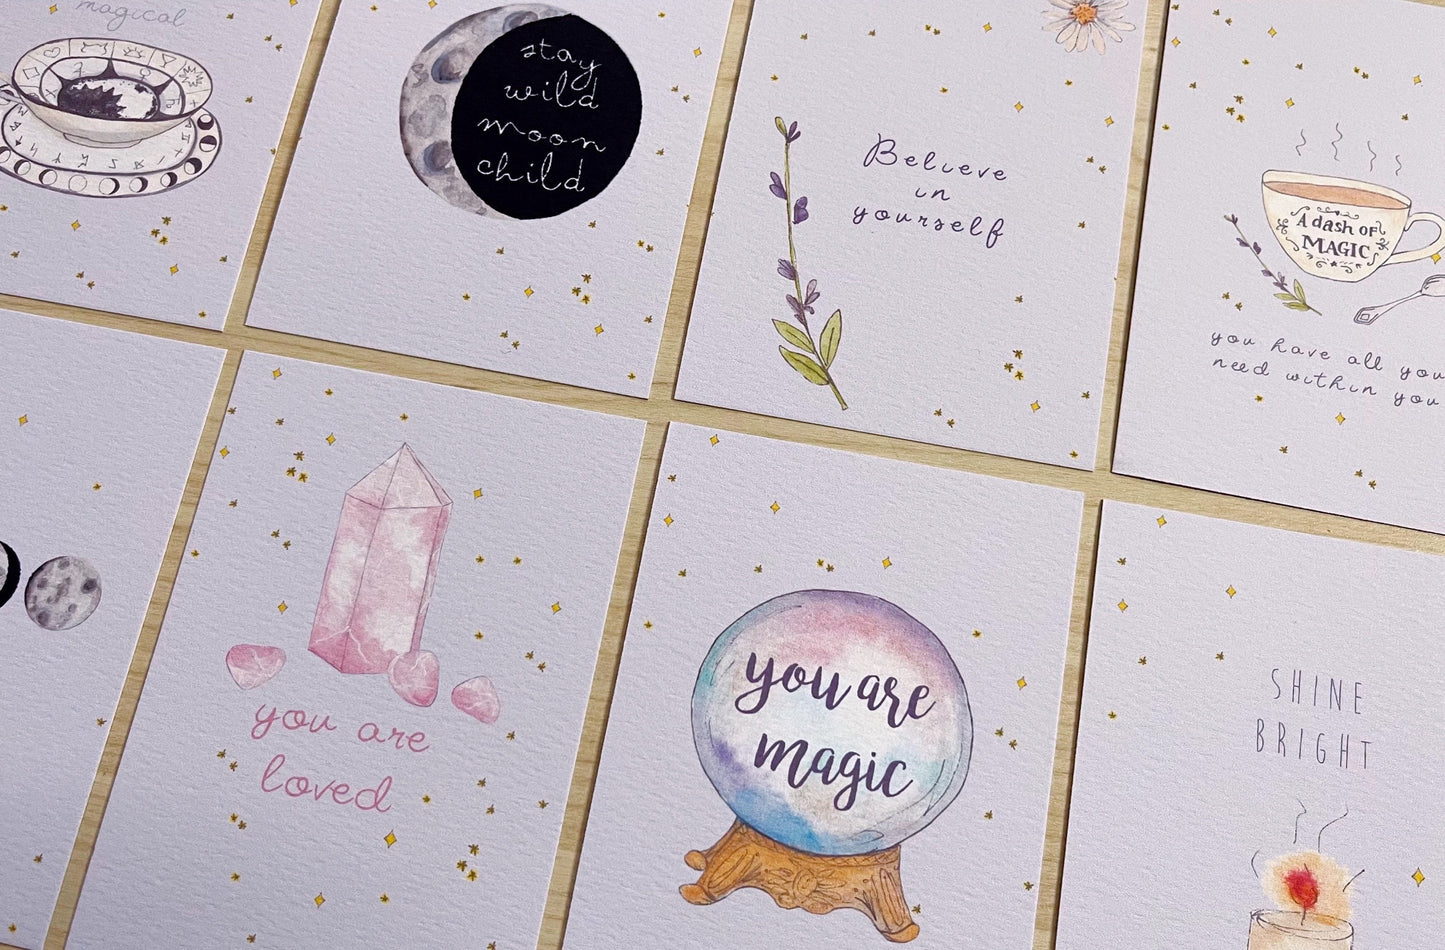 Magical Affirmation Cards